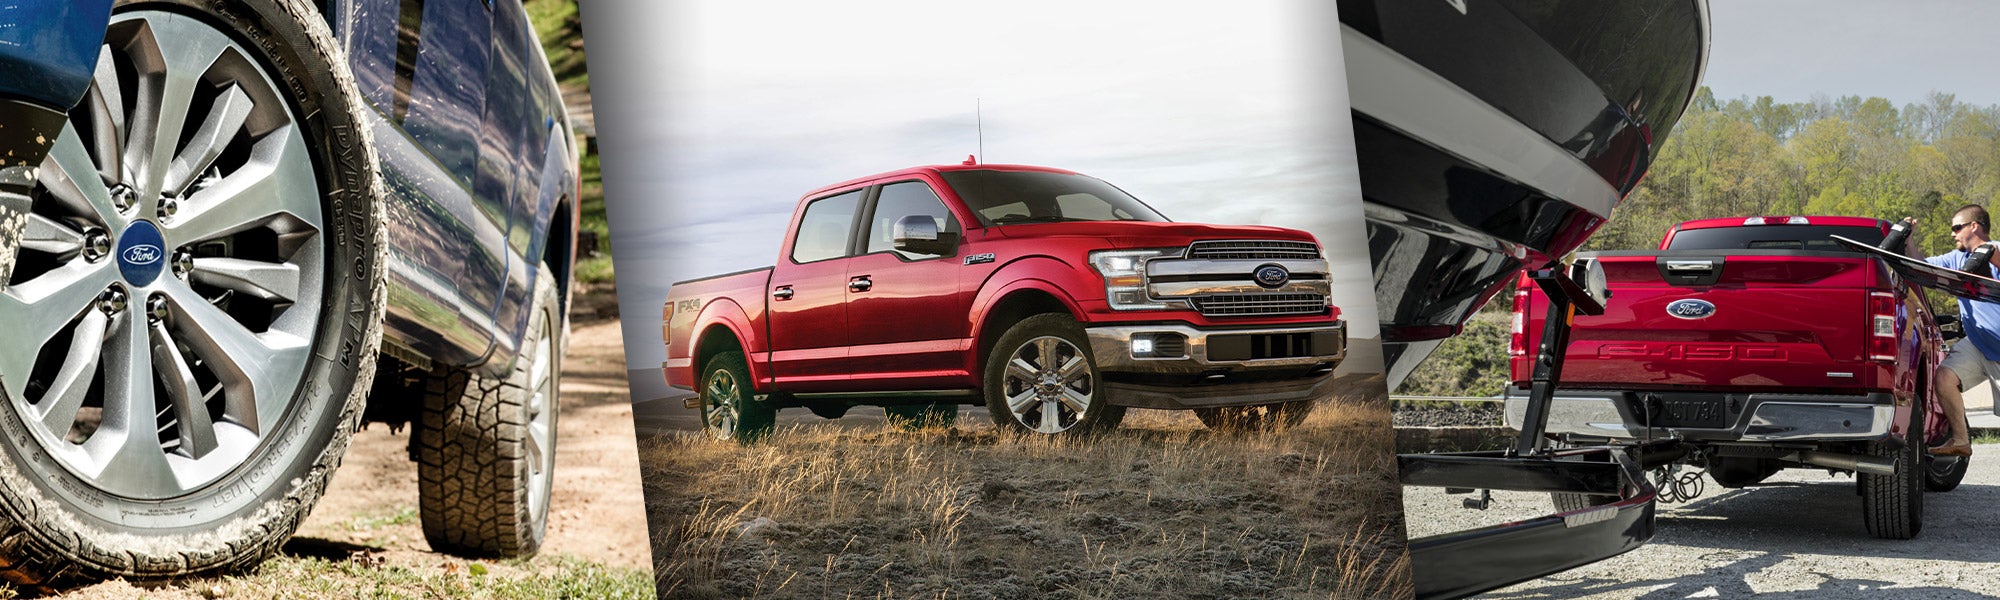 2020 Ford F-150 | Towing Capacity | McCandless Ford Meadville 2020 Ford F 150 Towing Capacity 5.0 V8